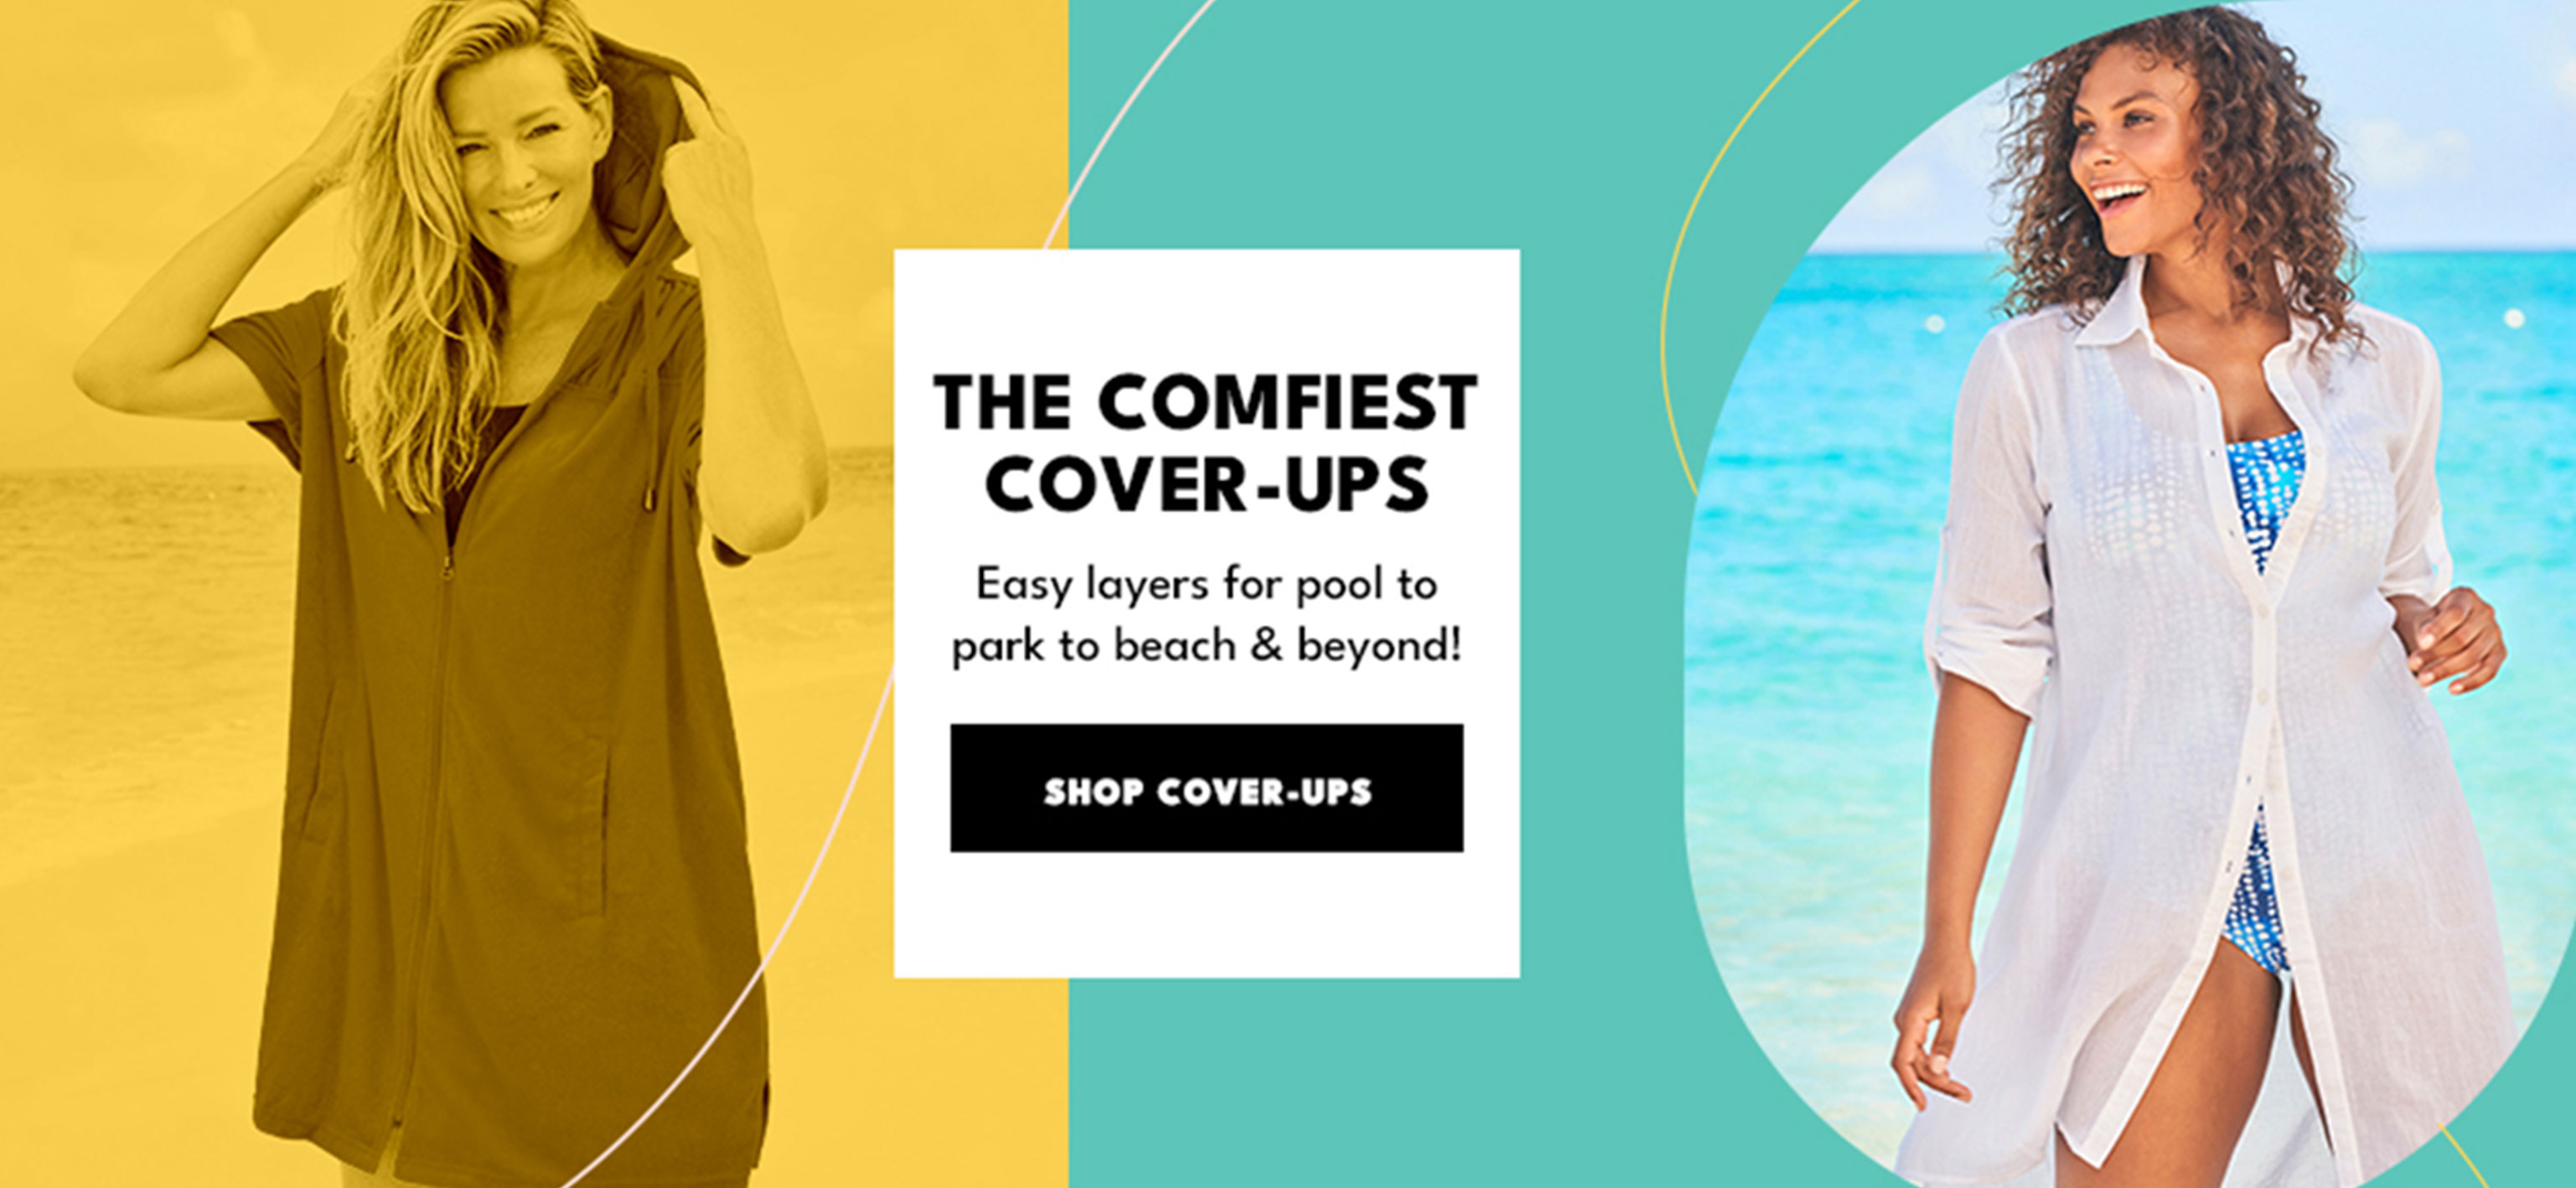 One-piece winders. Classic swimsuits with full comfortable coverage. Shop One-pieces